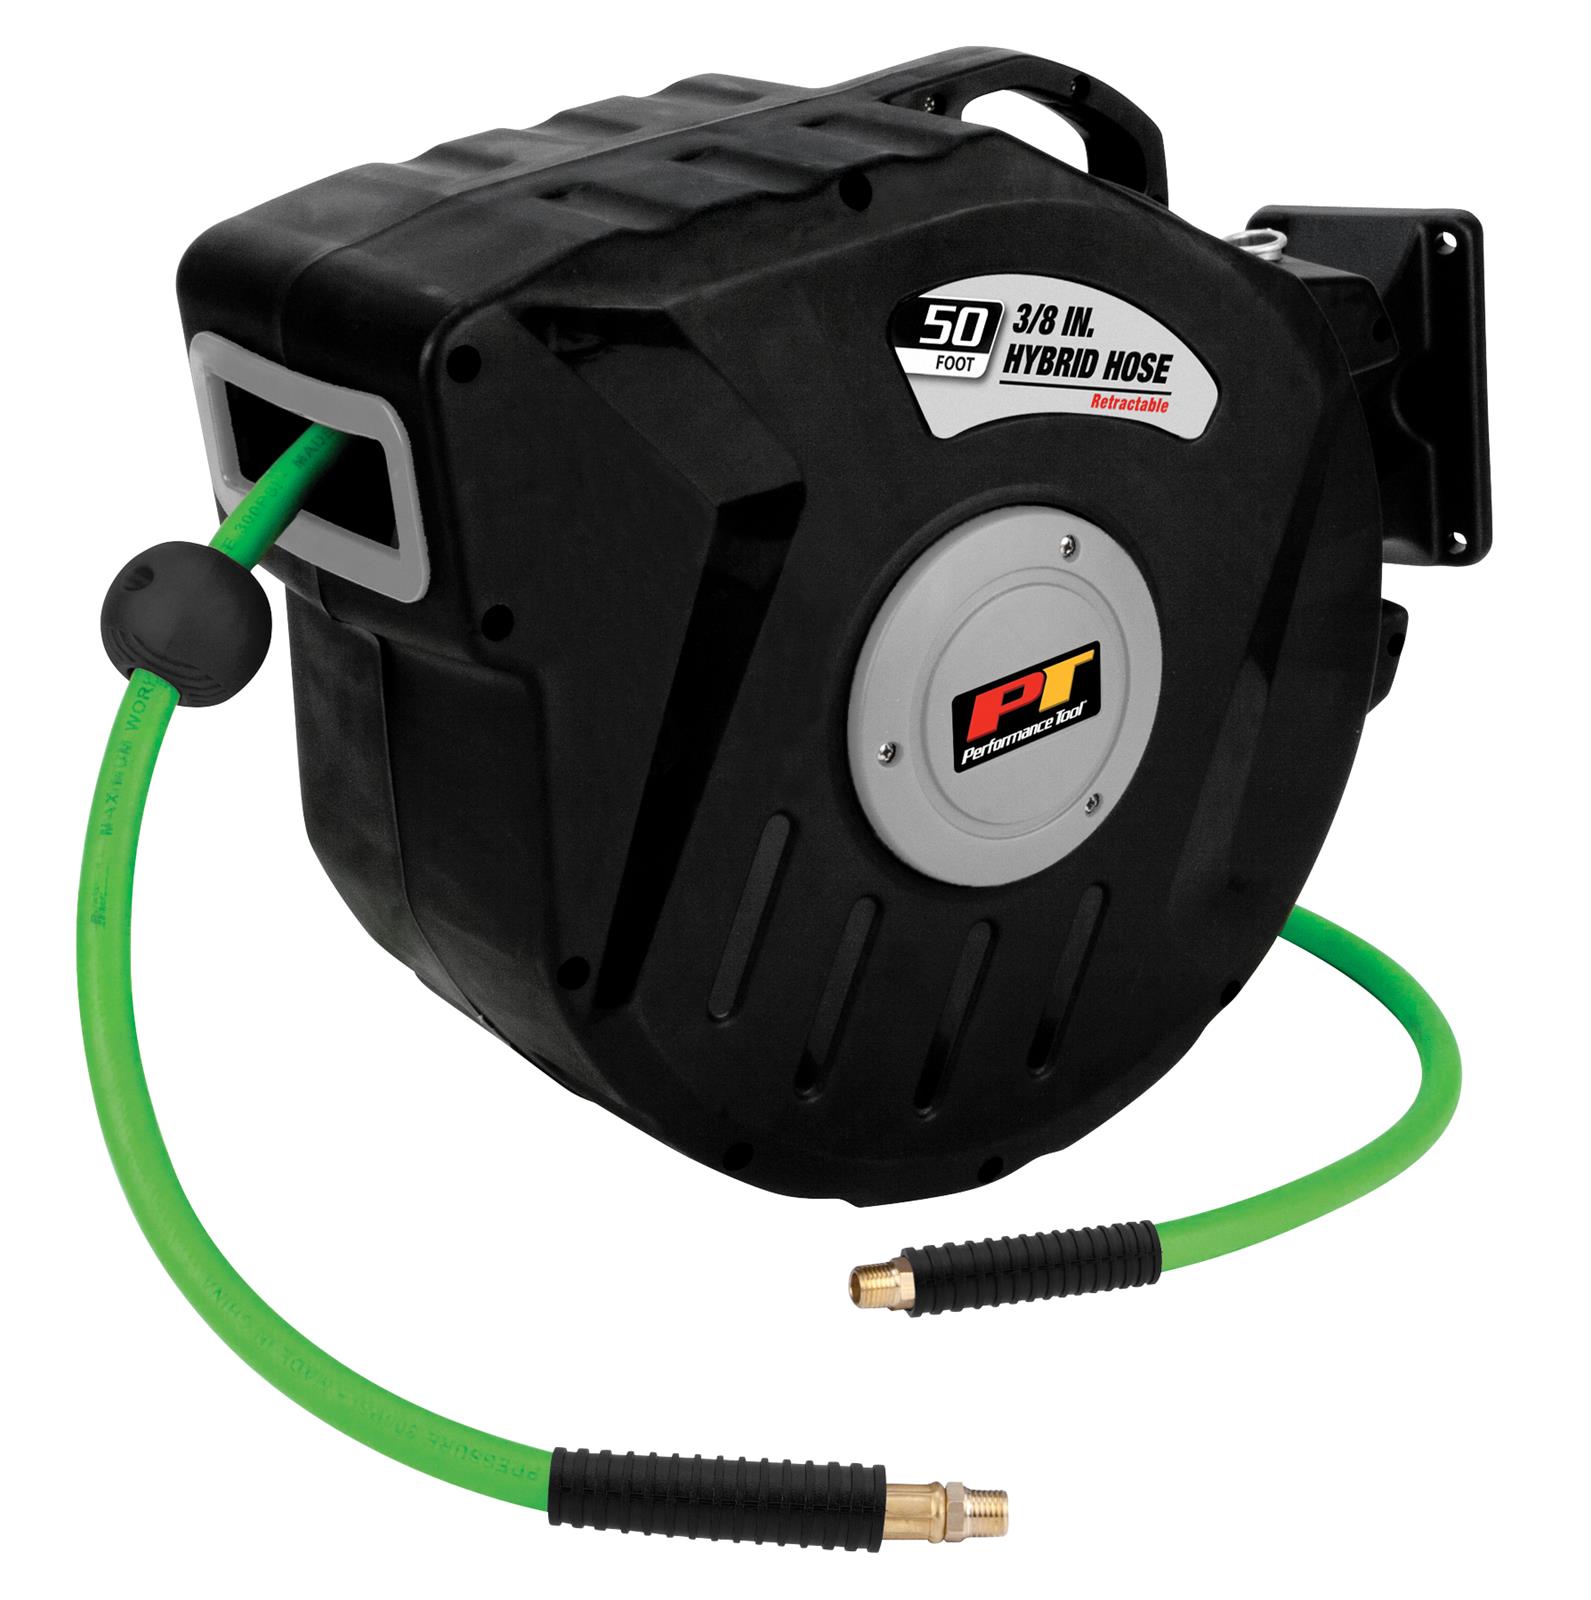 Performance Tool M613 50 ft x 3/8 Inch Hybrid Air Hose and Reel